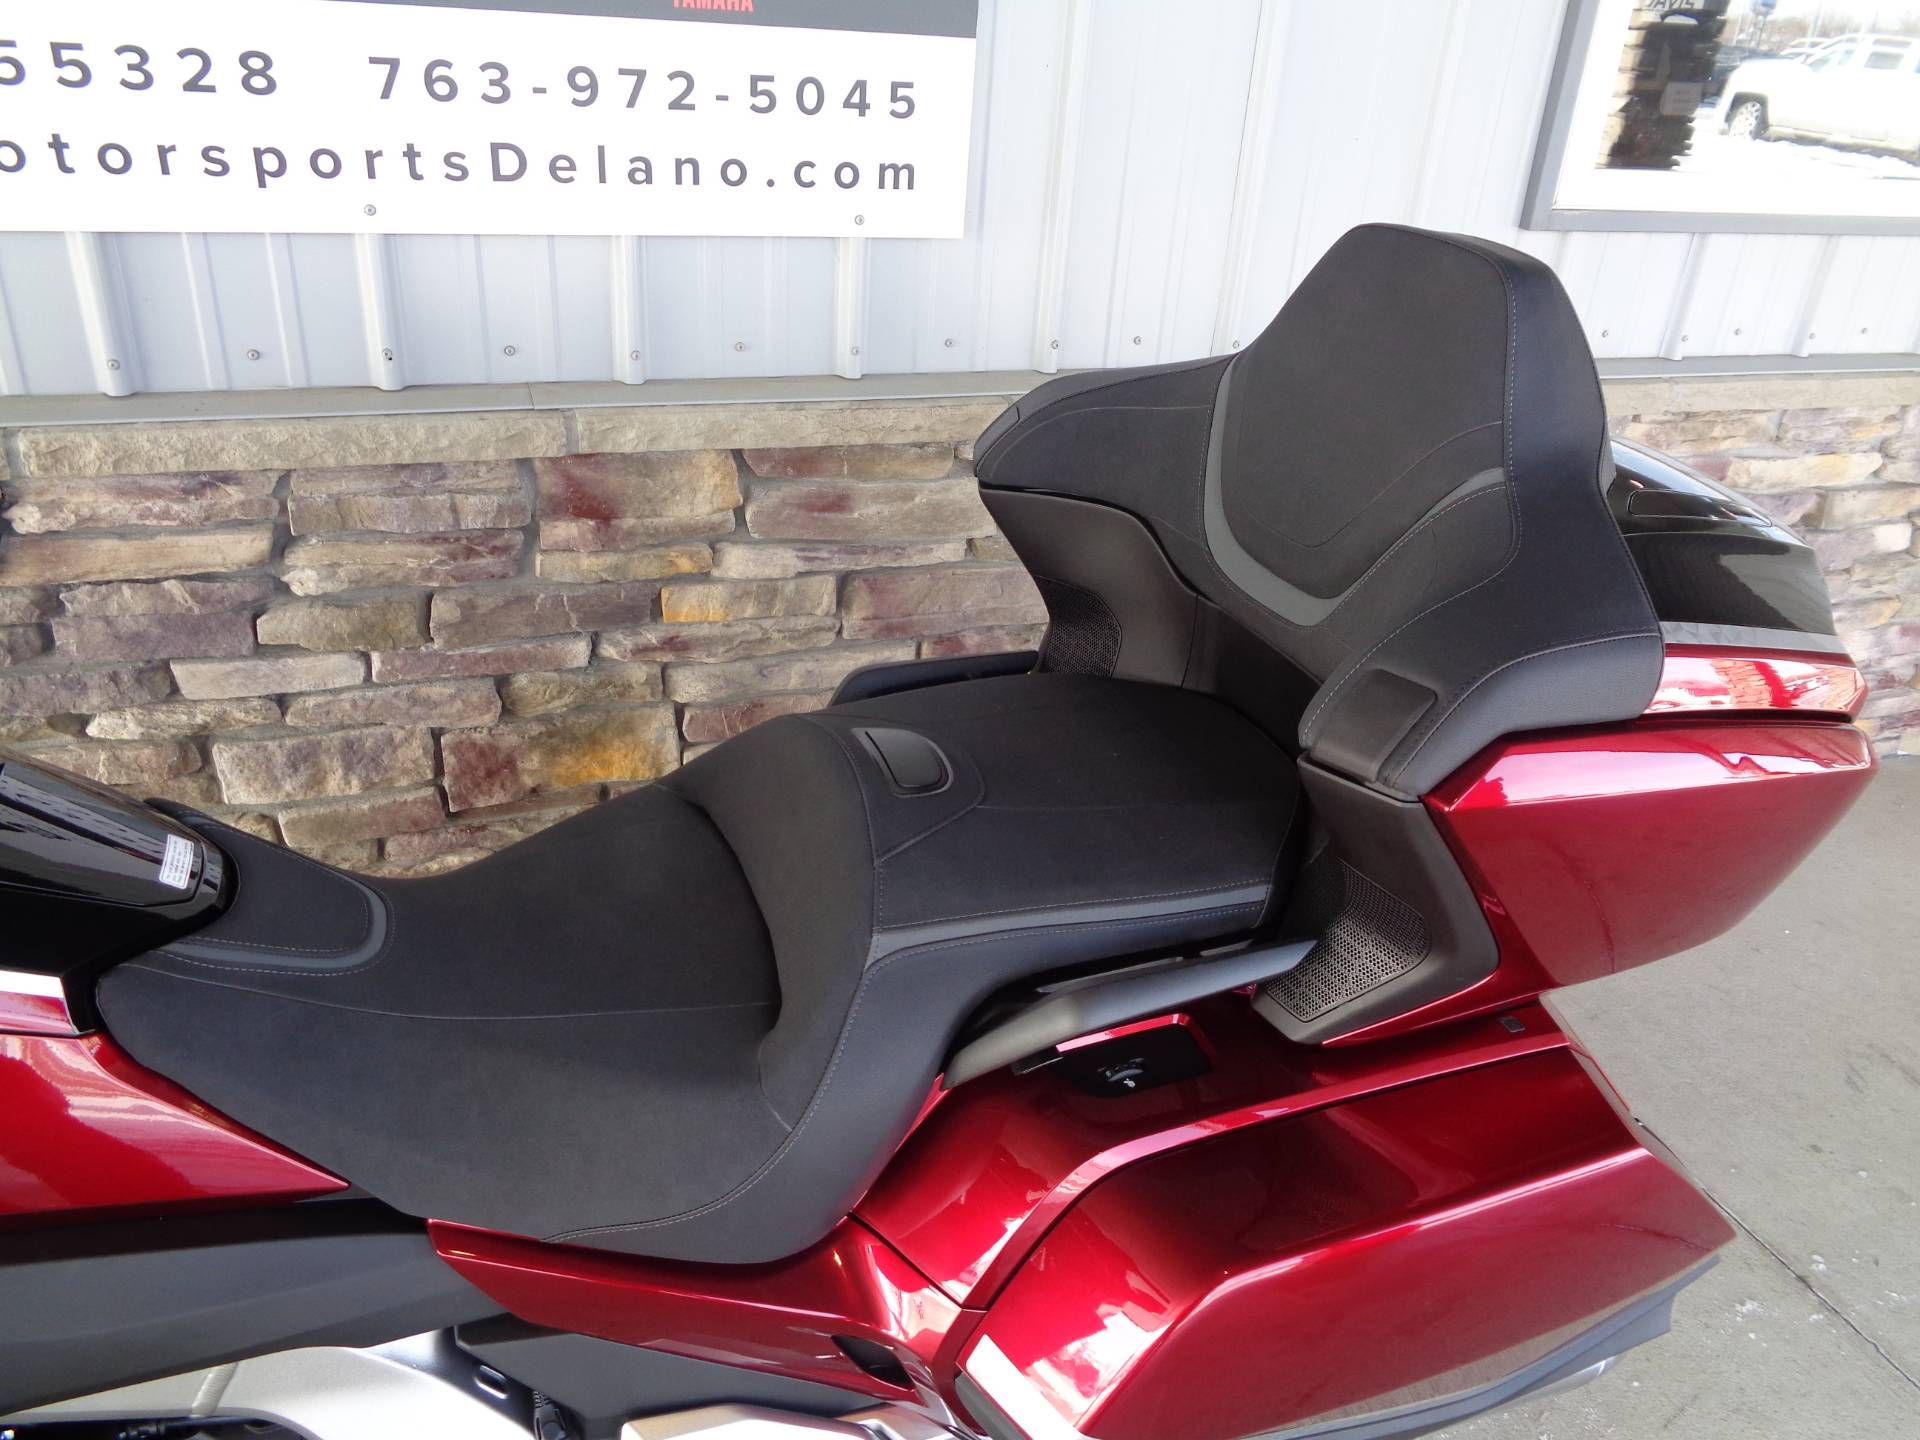 New 2021 Honda Gold Wing Tour Automatic Dct Motorcycles In Delano Mn N A Candy Ardent Red